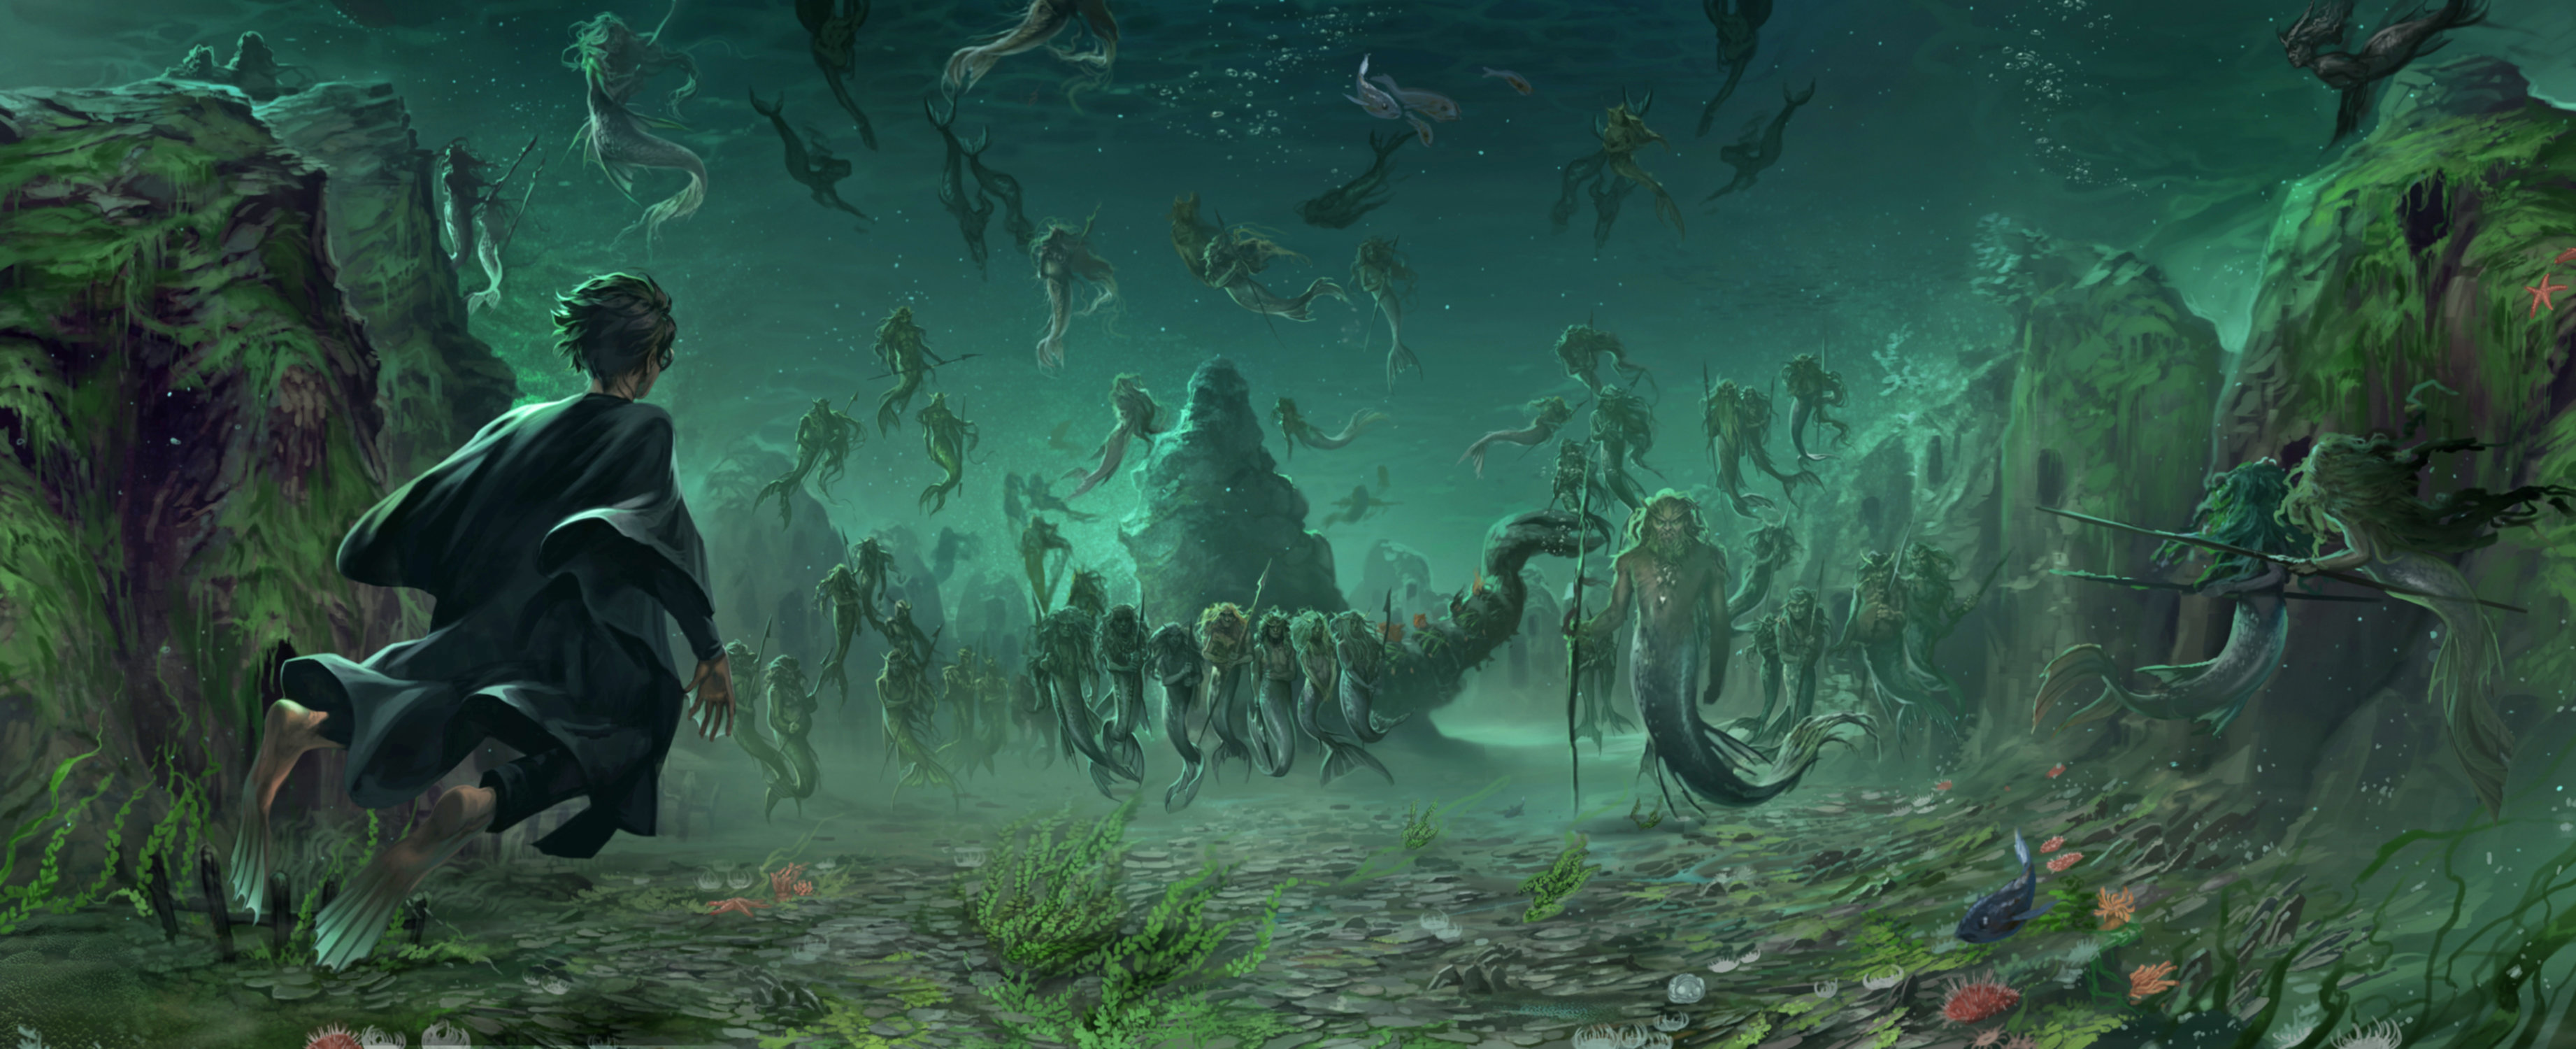 Image result for pottermore triwizard tournament underwater